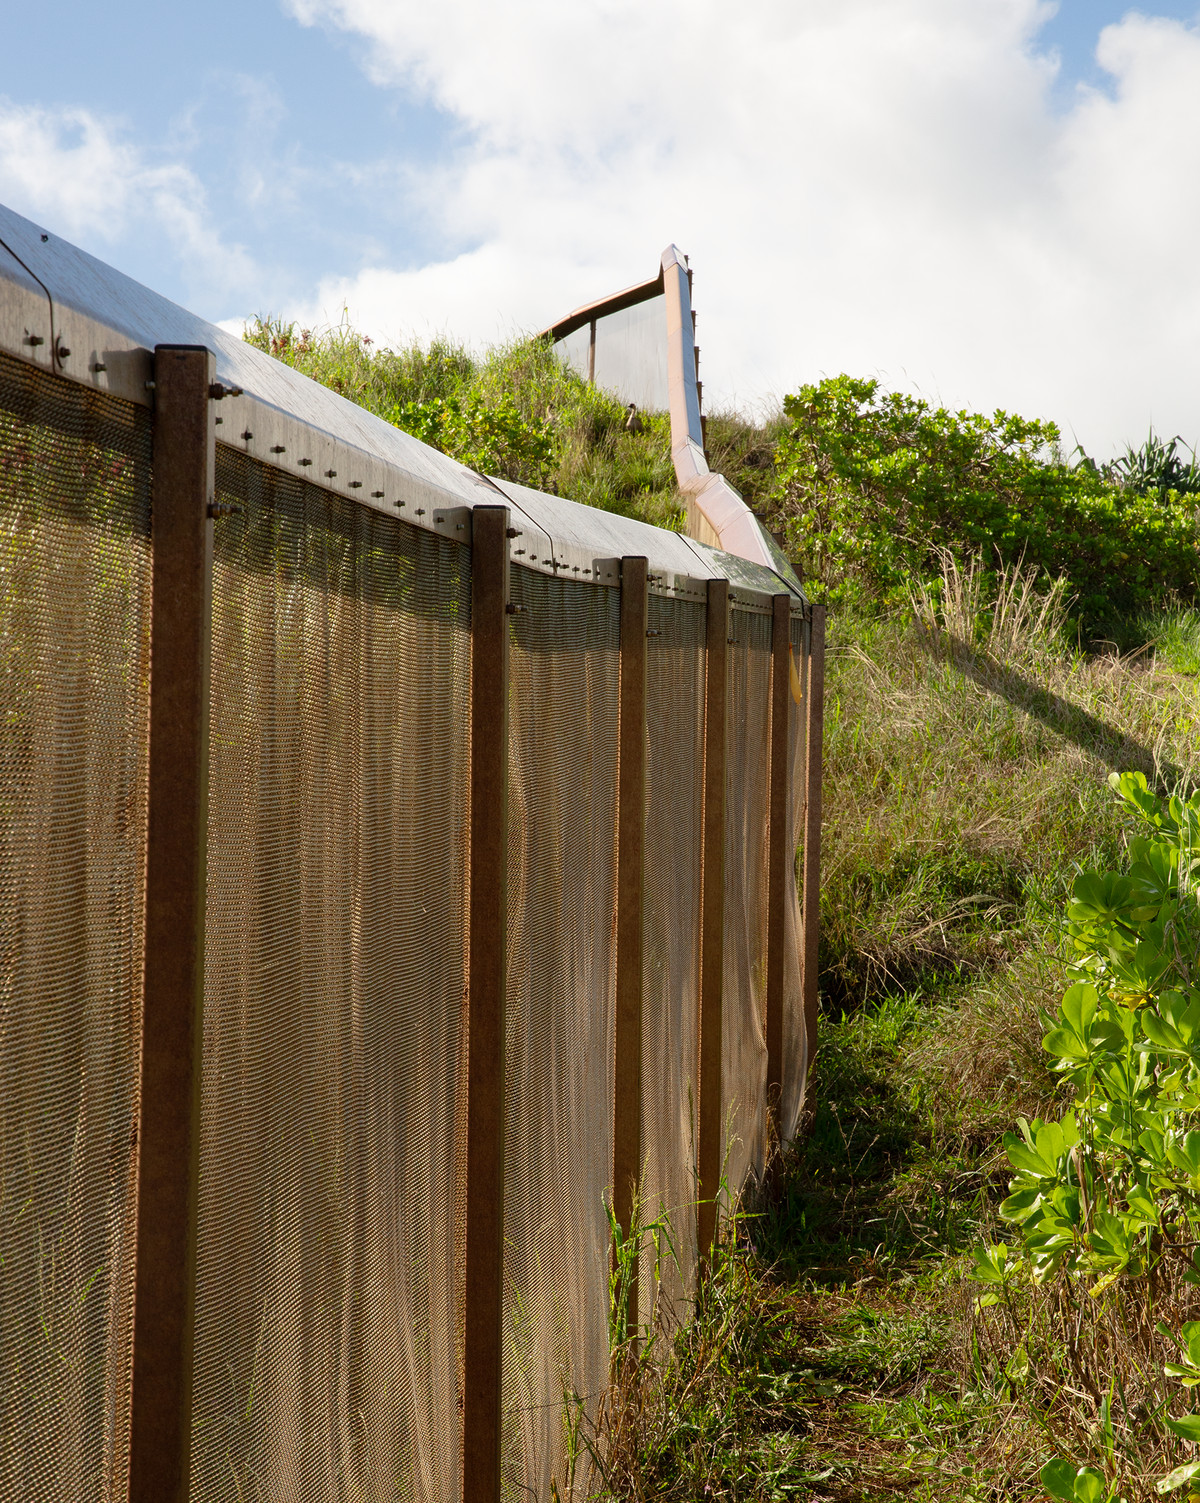 A fence whose posts are connected by a mesh-like netting bisects a grassy hill.